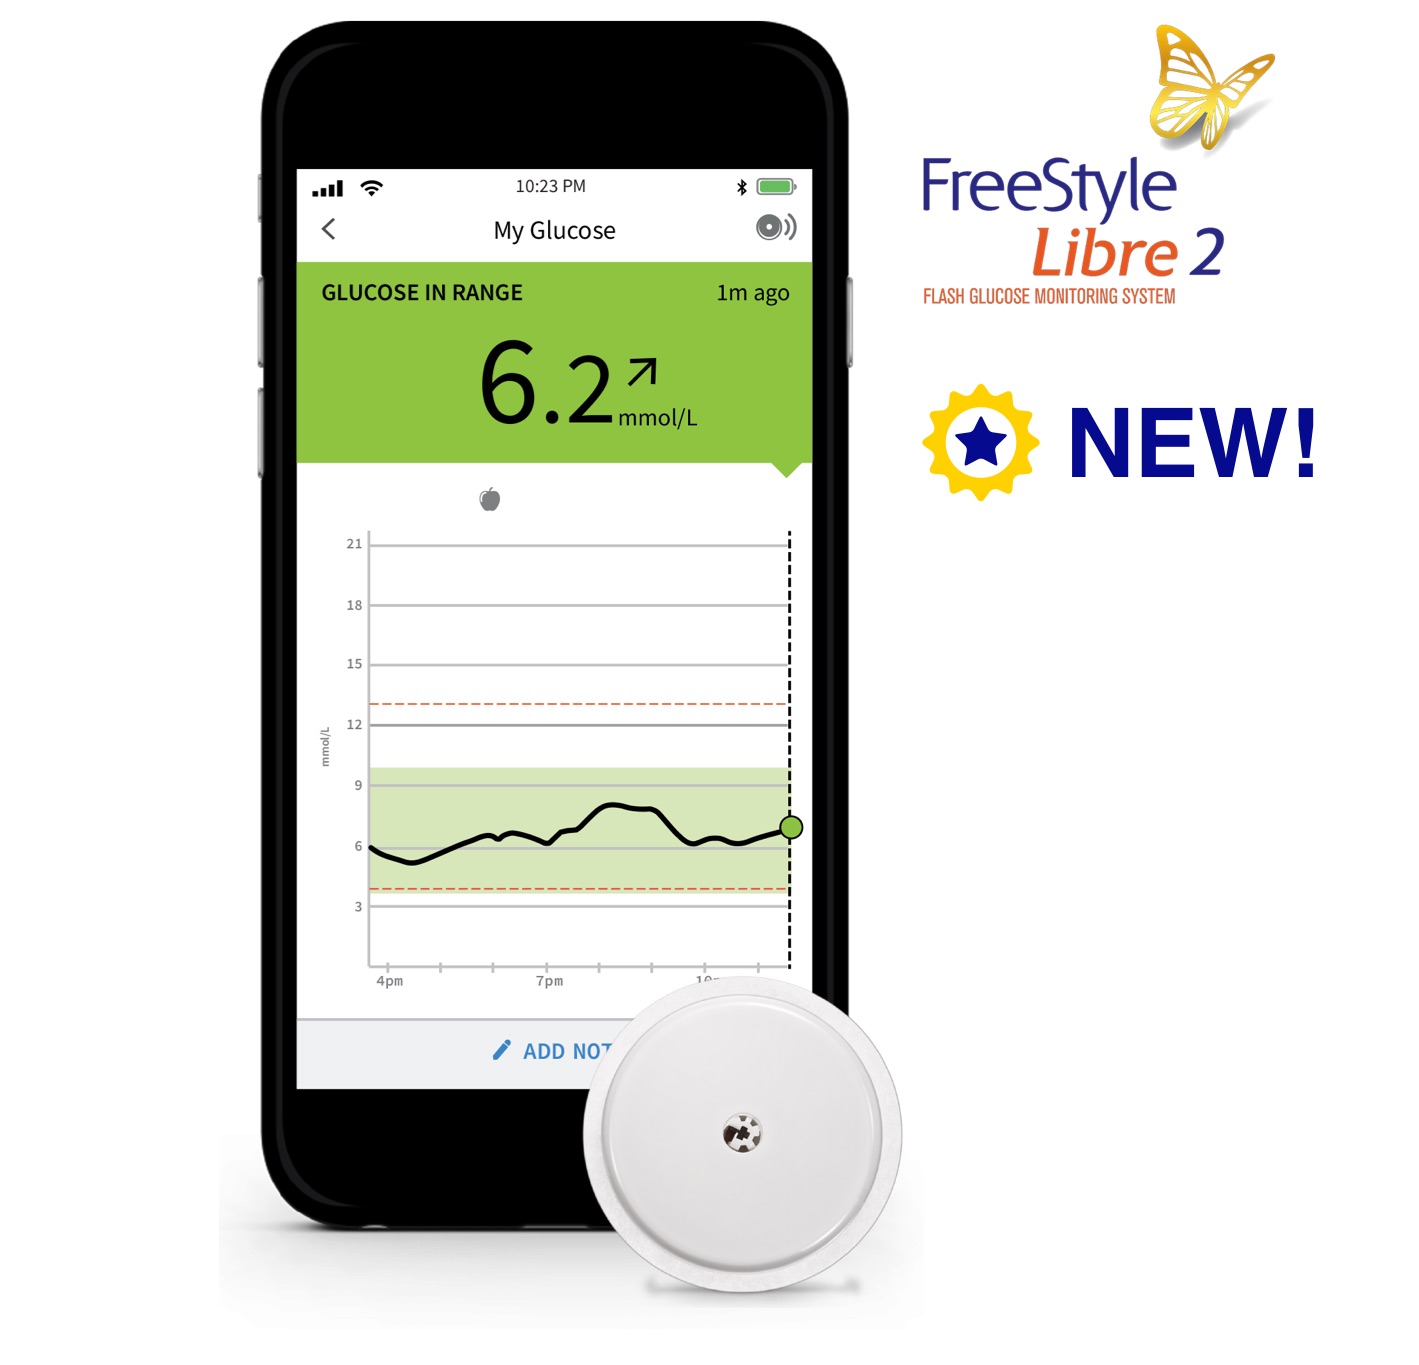 FreeStyle Libre 2 system NEW!